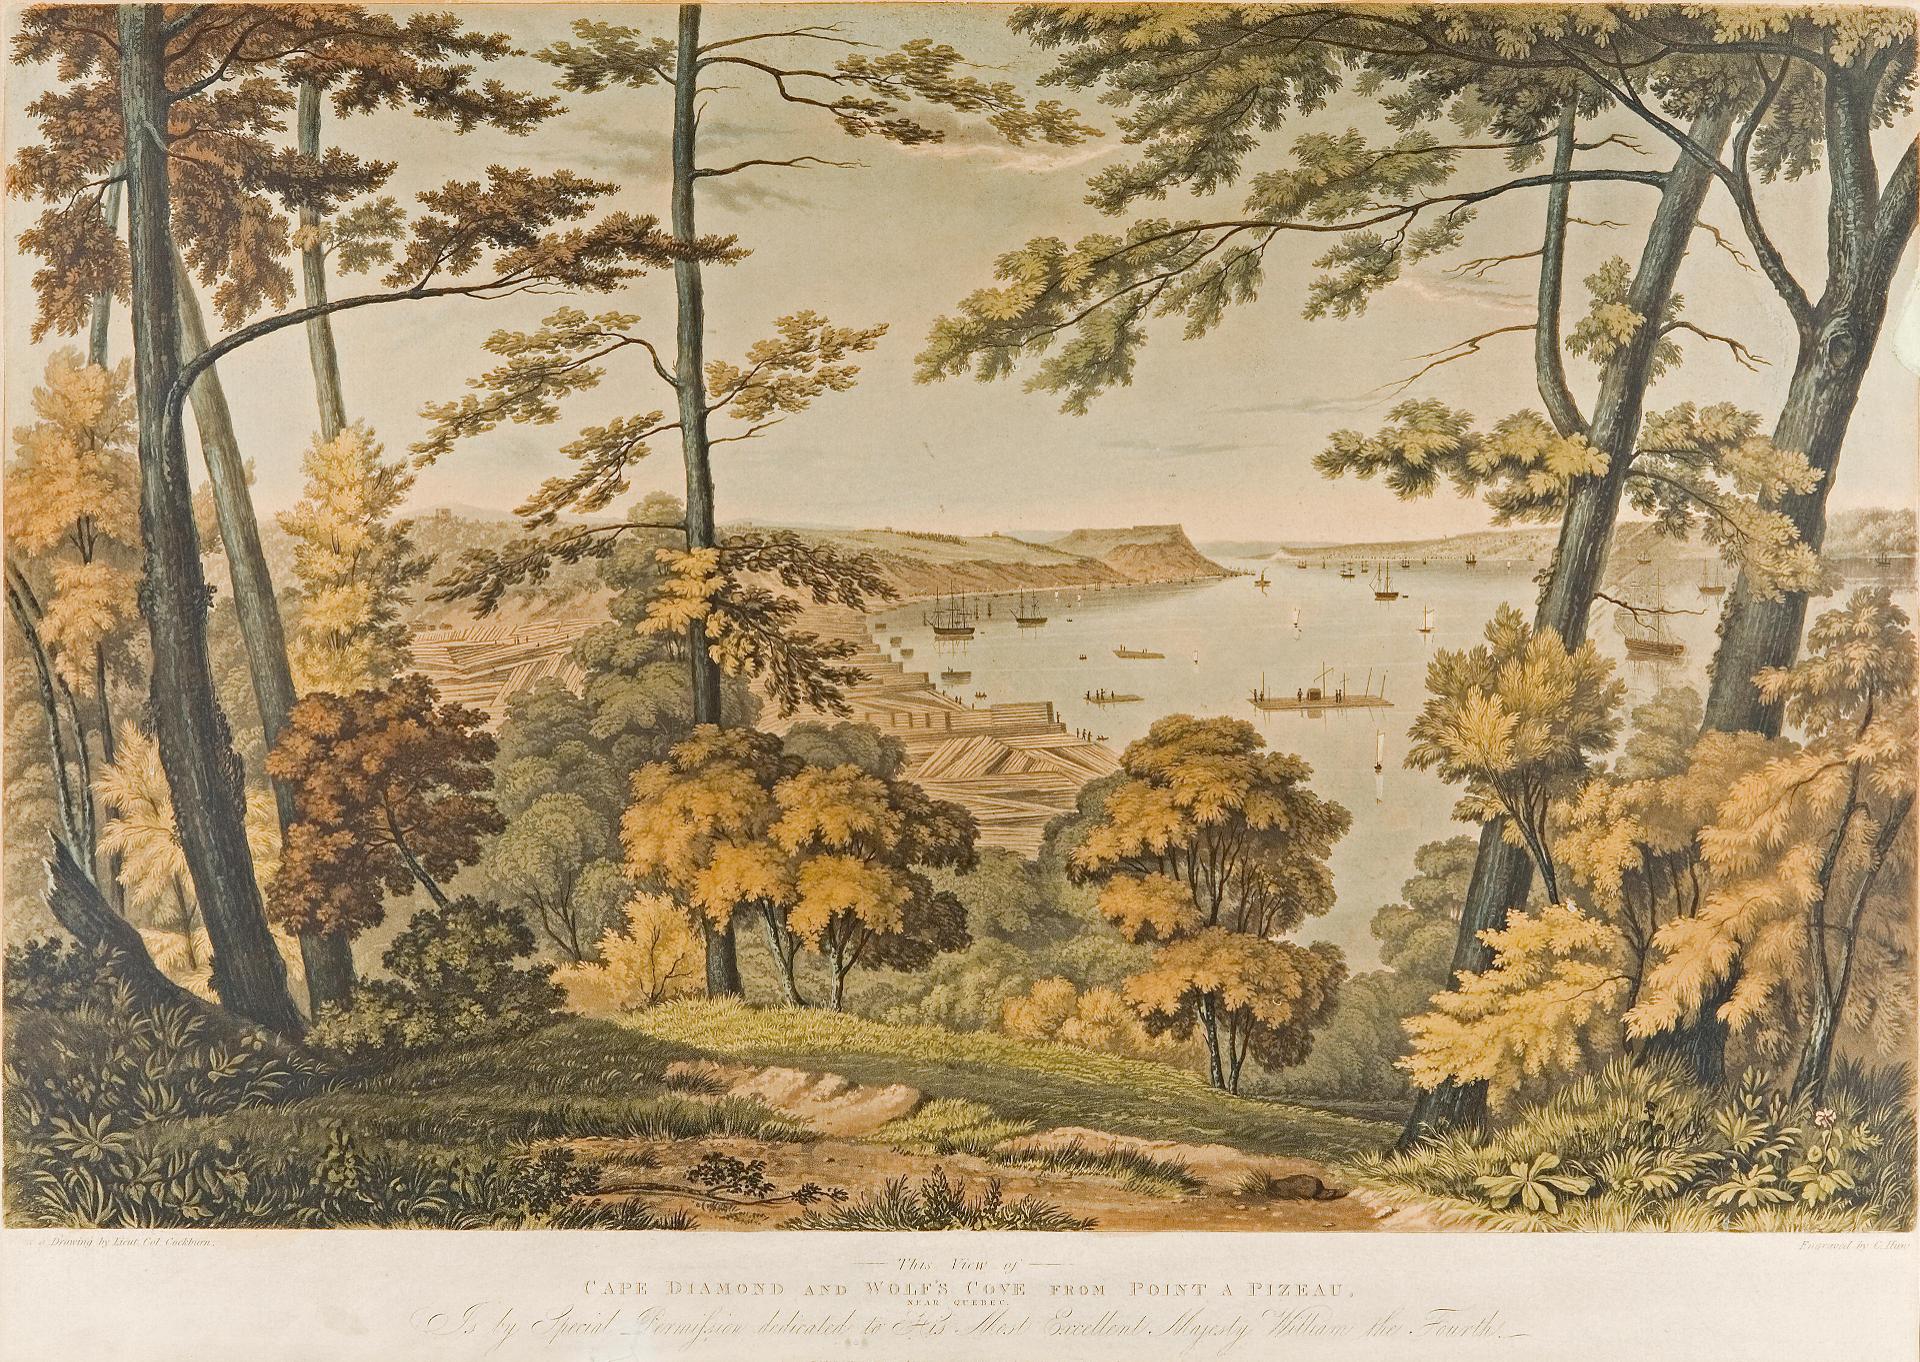 James Pattison Cockburn (1778-1847) - Cape Diamond and Wolf's Cove From Point A Pizeau